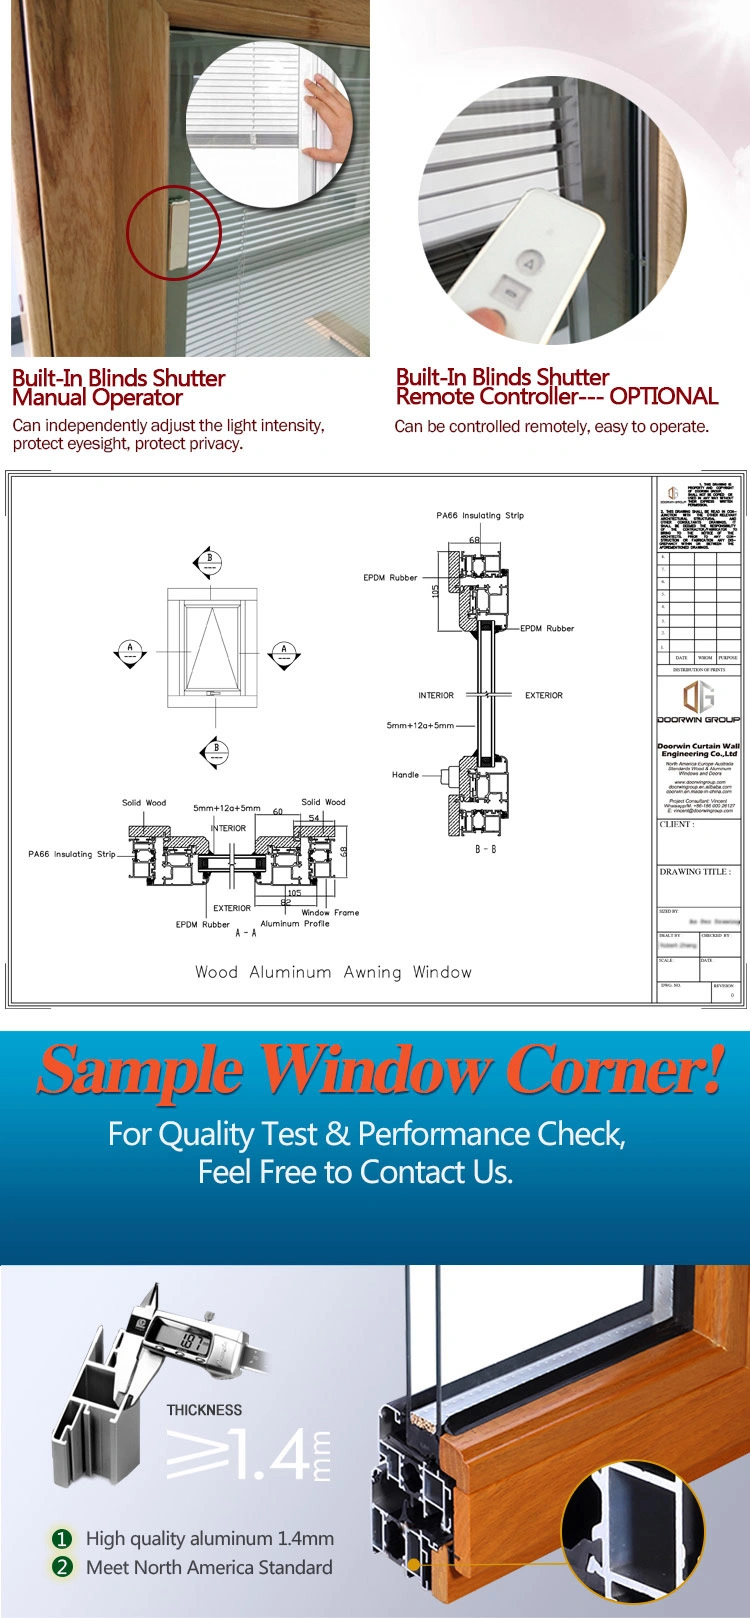 Aluminum Awning / Outward Opening Window for Bathroom